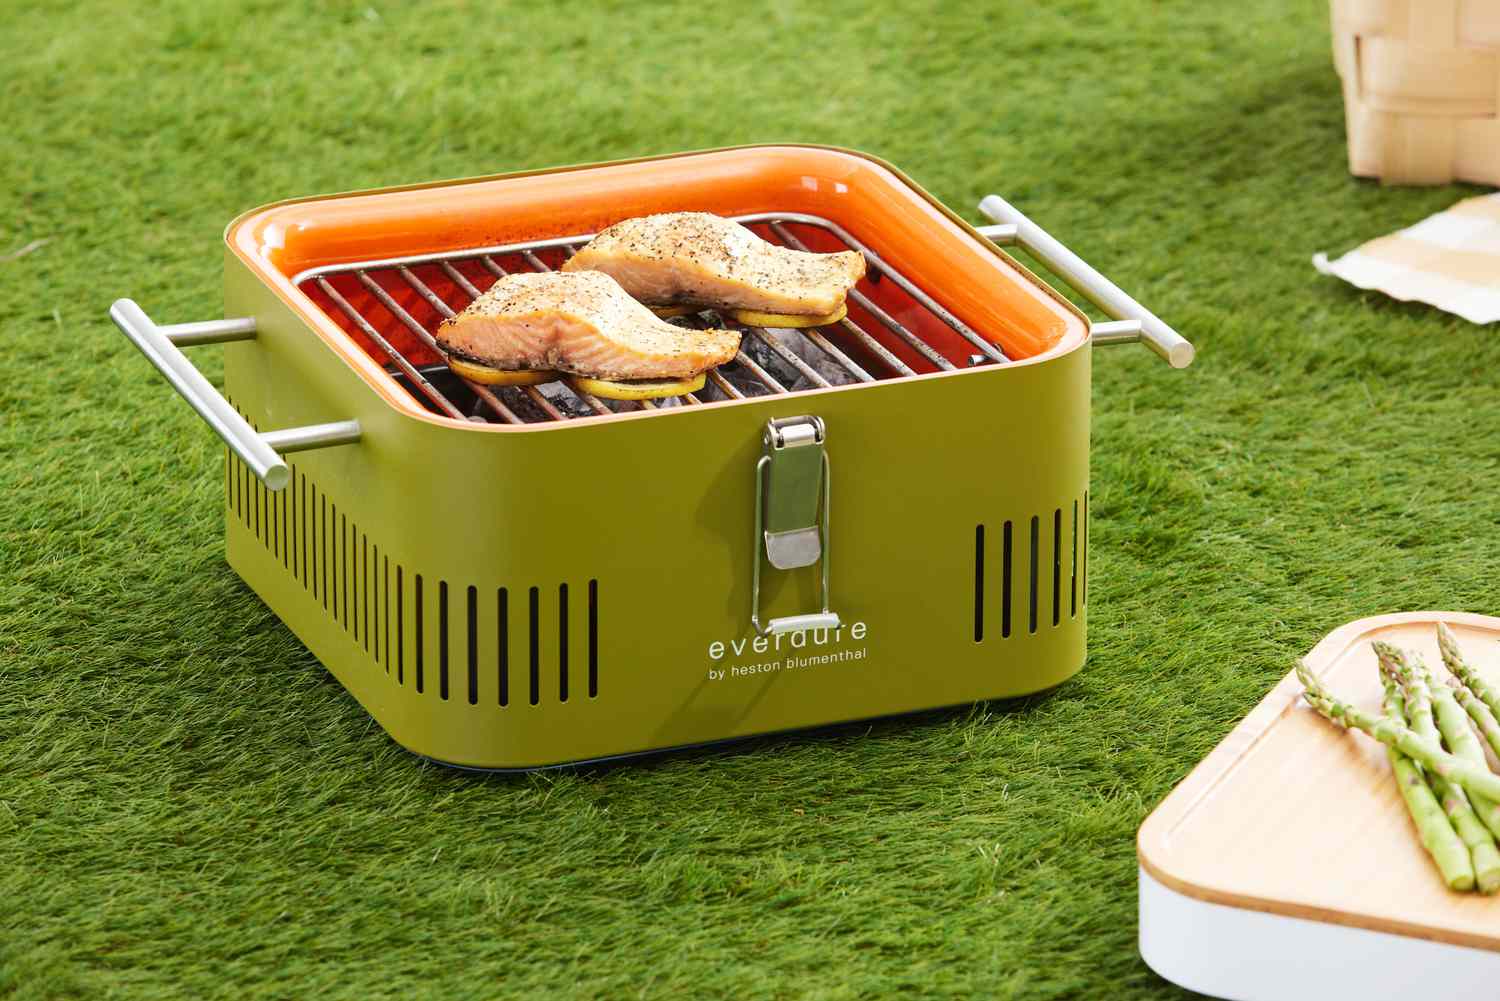 Salmon fillets cooking on lemon slices on a Everdure Cube Portable Charcoal Grill displayed on grass 